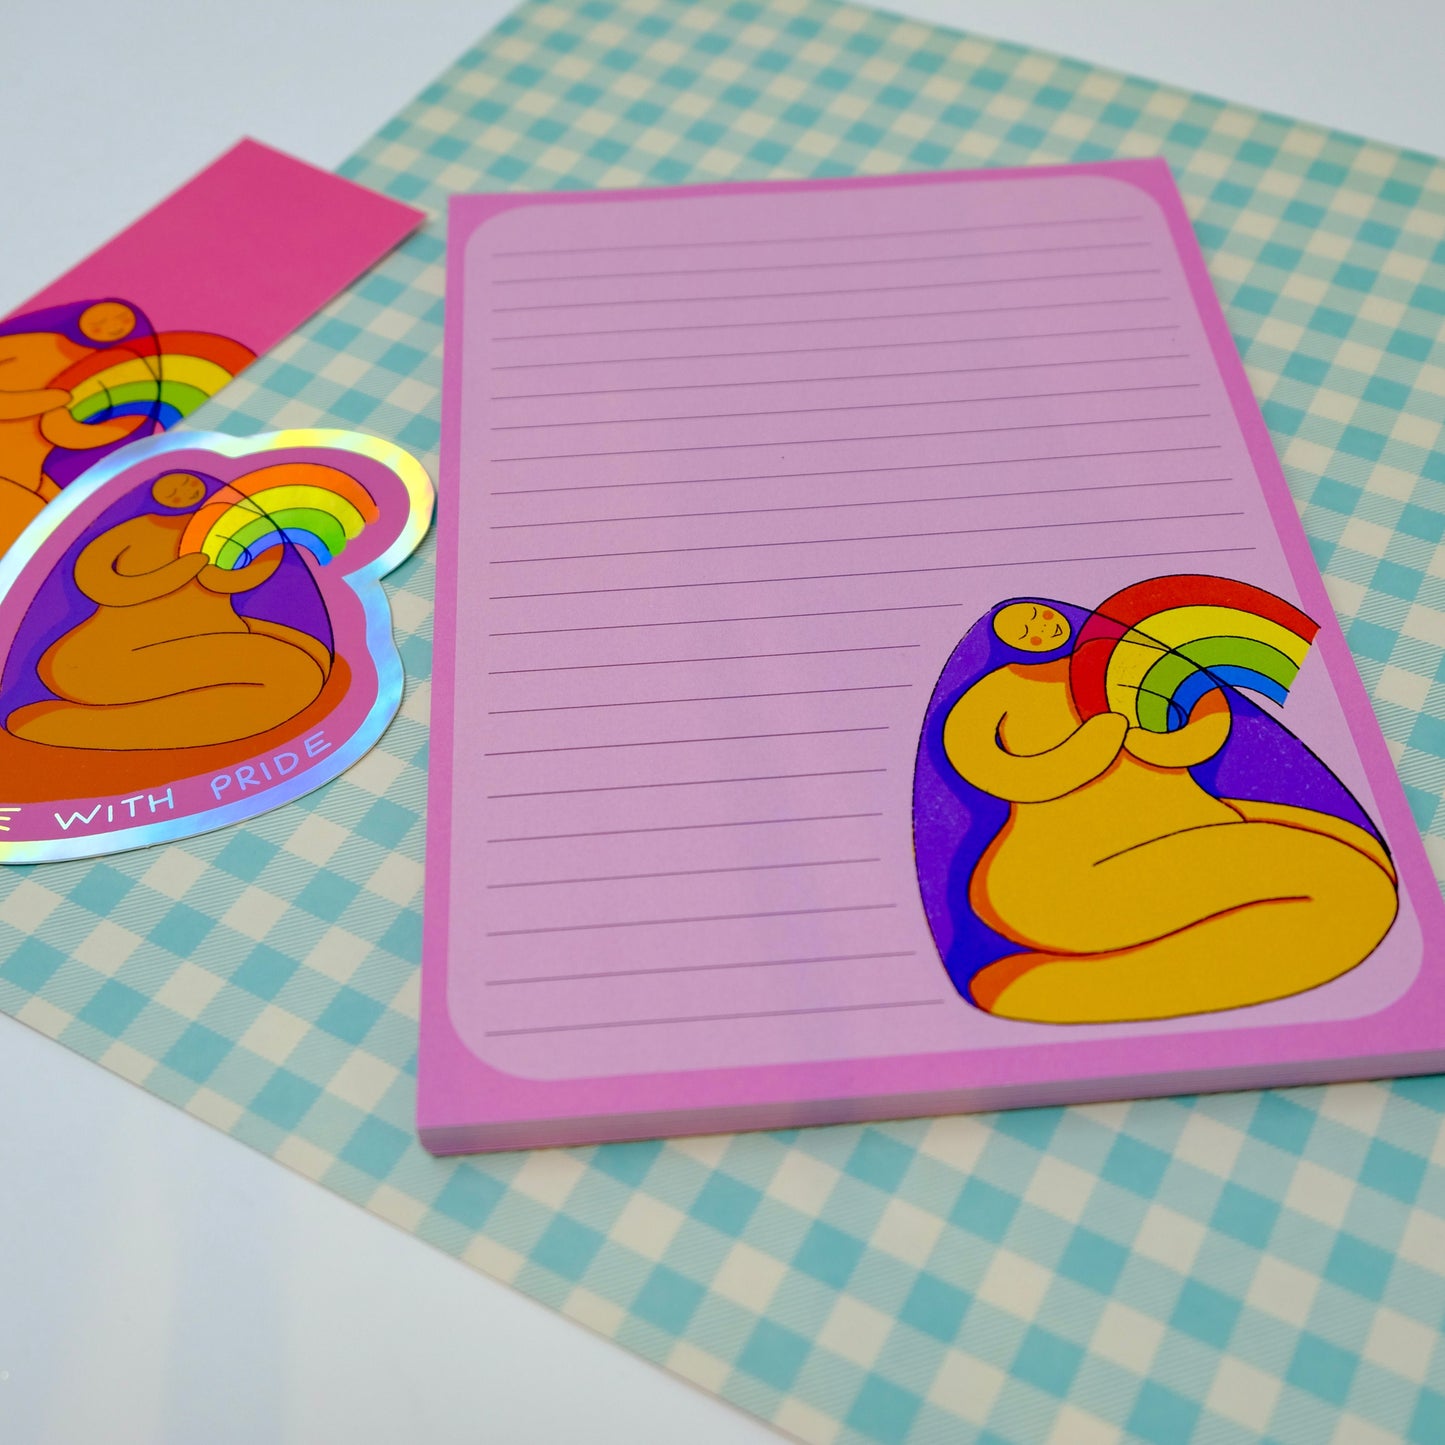 Rainbow Goddess Stationary Gift Set - Live With Pride Stationary Bundle - Pink LGBTQIA Notepad, Bookmark and Sticker